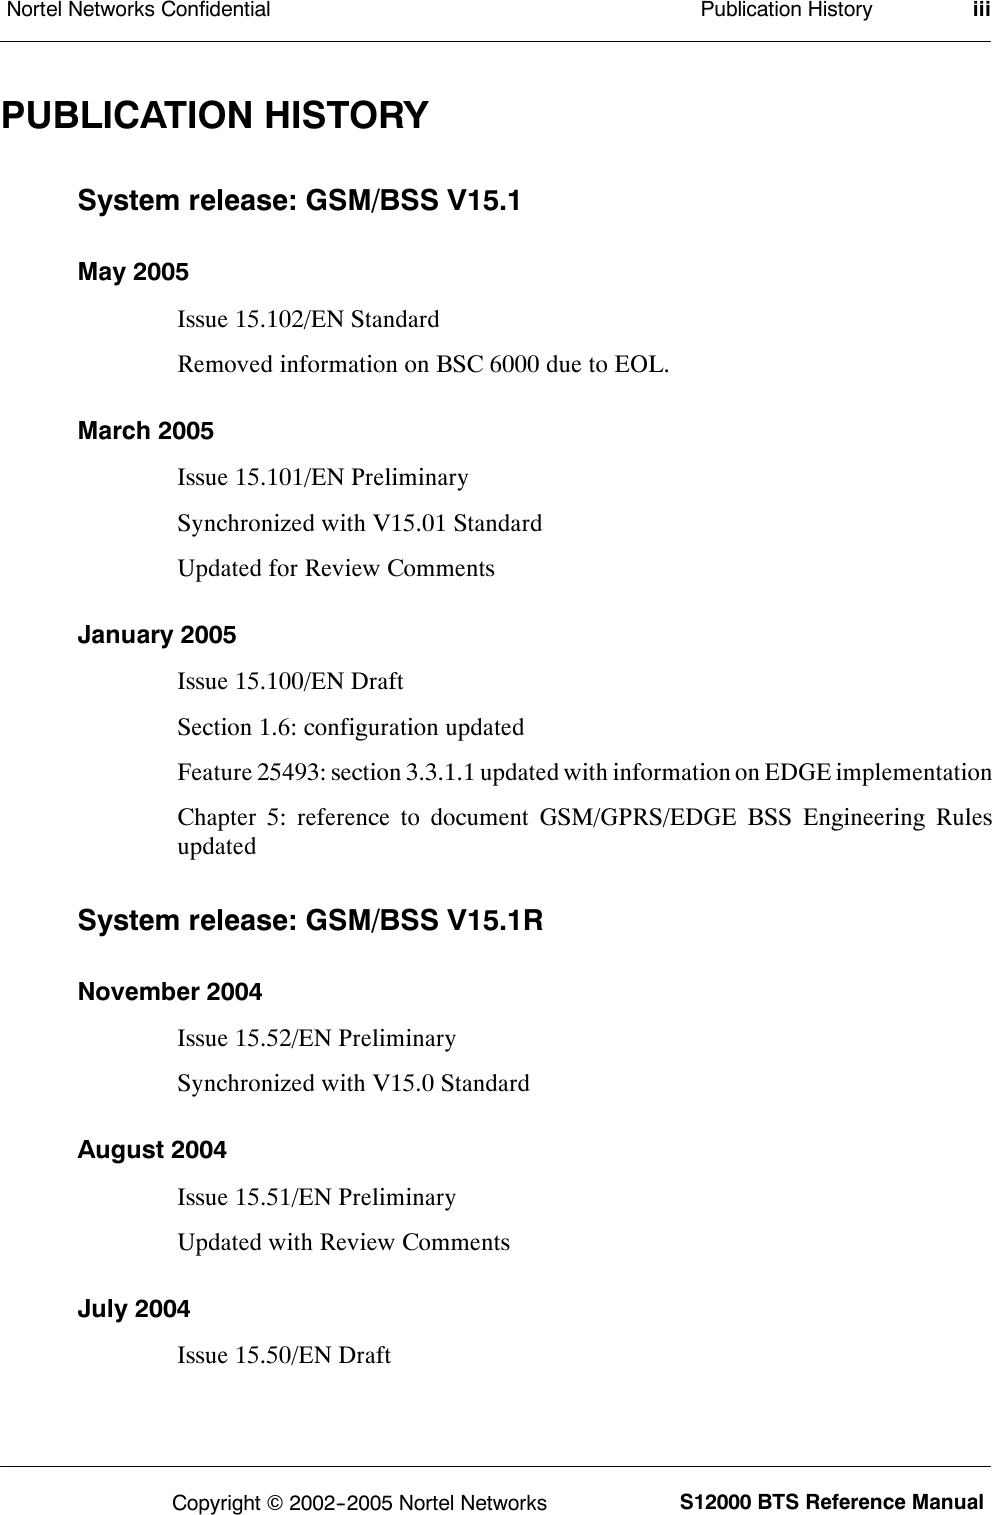 Publication HistoryNortel Networks Confidential iiiS12000 BTS Reference ManualCopyright ©2002--2005 Nortel NetworksPUBLICATION HISTORYSystem release: GSM/BSS V15.1May 2005Issue 15.102/EN StandardRemoved information on BSC 6000 due to EOL.March 2005Issue 15.101/EN PreliminarySynchronized with V15.01 StandardUpdated for Review CommentsJanuary 2005Issue 15.100/EN DraftSection 1.6: configuration updatedFeature 25493: section 3.3.1.1 updated with information on EDGE implementationChapter 5: reference to document GSM/GPRS/EDGE BSS Engineering RulesupdatedSystem release: GSM/BSS V15.1RNovember 2004Issue 15.52/EN PreliminarySynchronized with V15.0 StandardAugust 2004Issue 15.51/EN PreliminaryUpdated with Review CommentsJuly 2004Issue 15.50/EN Draft